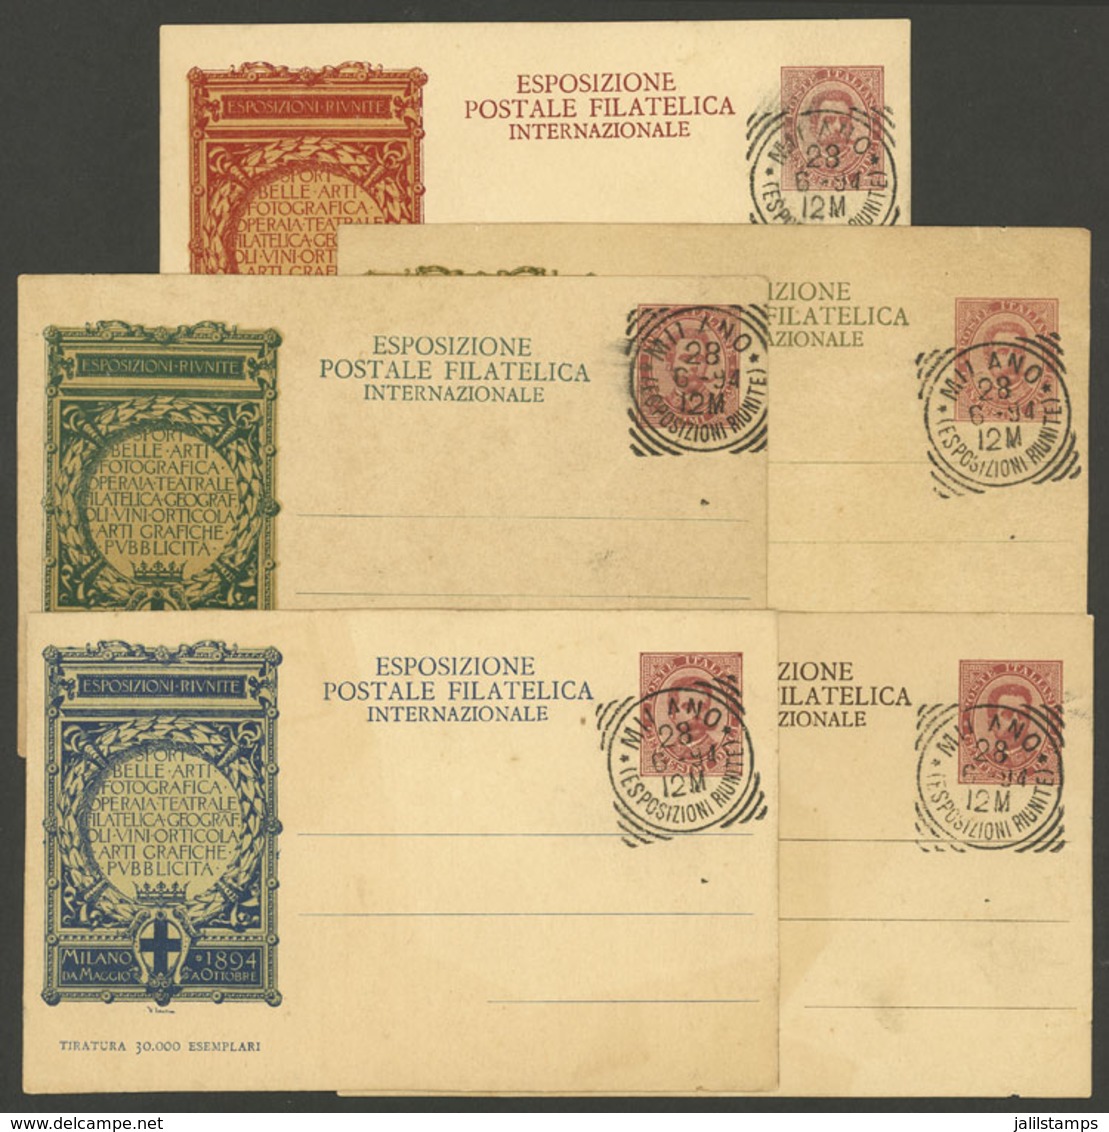 ITALY: 5 Postal Cards Of The 1894 Milano Intl. Exhibition, With Special Postmark Of The Expo Of 28/JUN, Very Nice! - Ohne Zuordnung